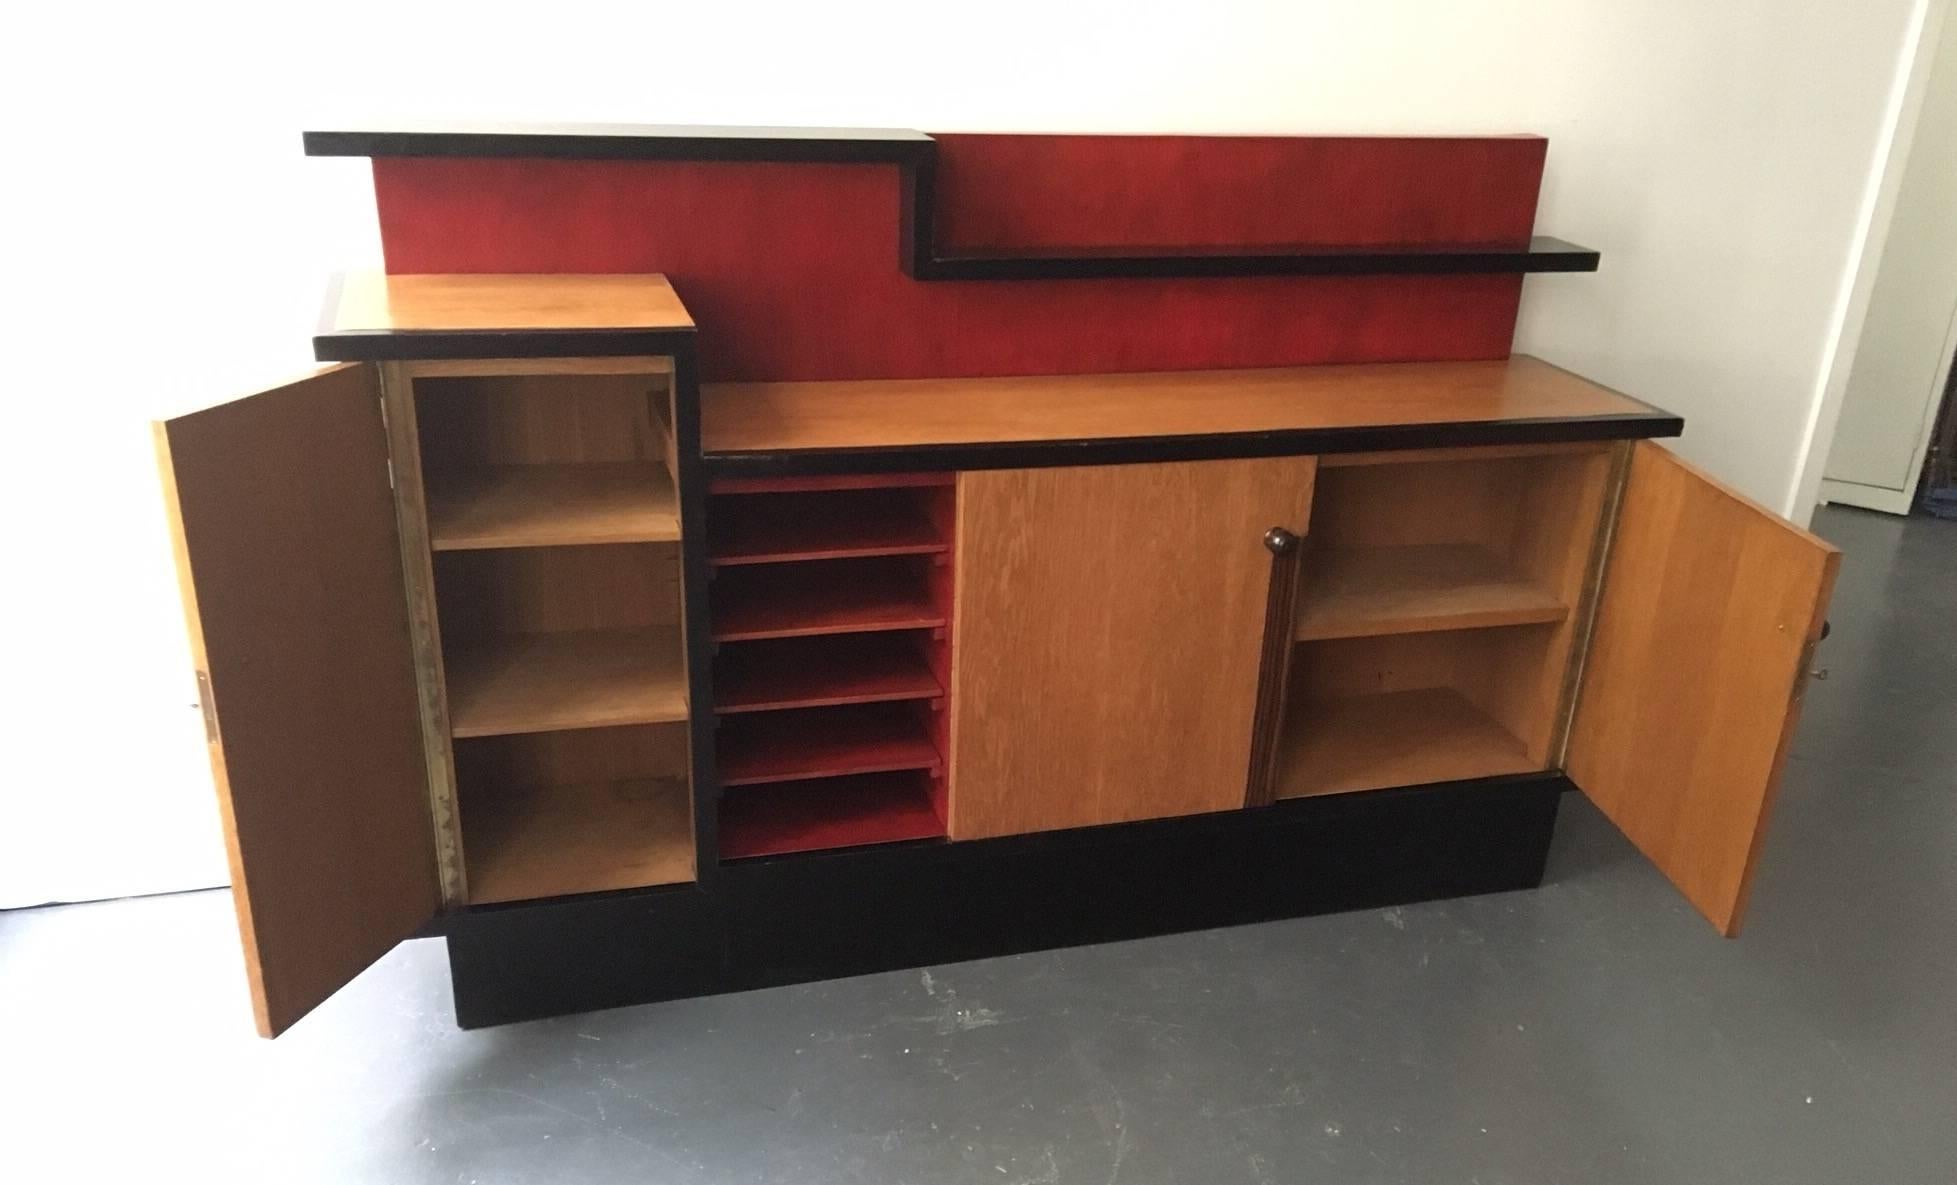 Asymmetrical Dutch Cabinet 'Hague School' Designed by Coen de Jong. c 1930 In Excellent Condition For Sale In New York, NY